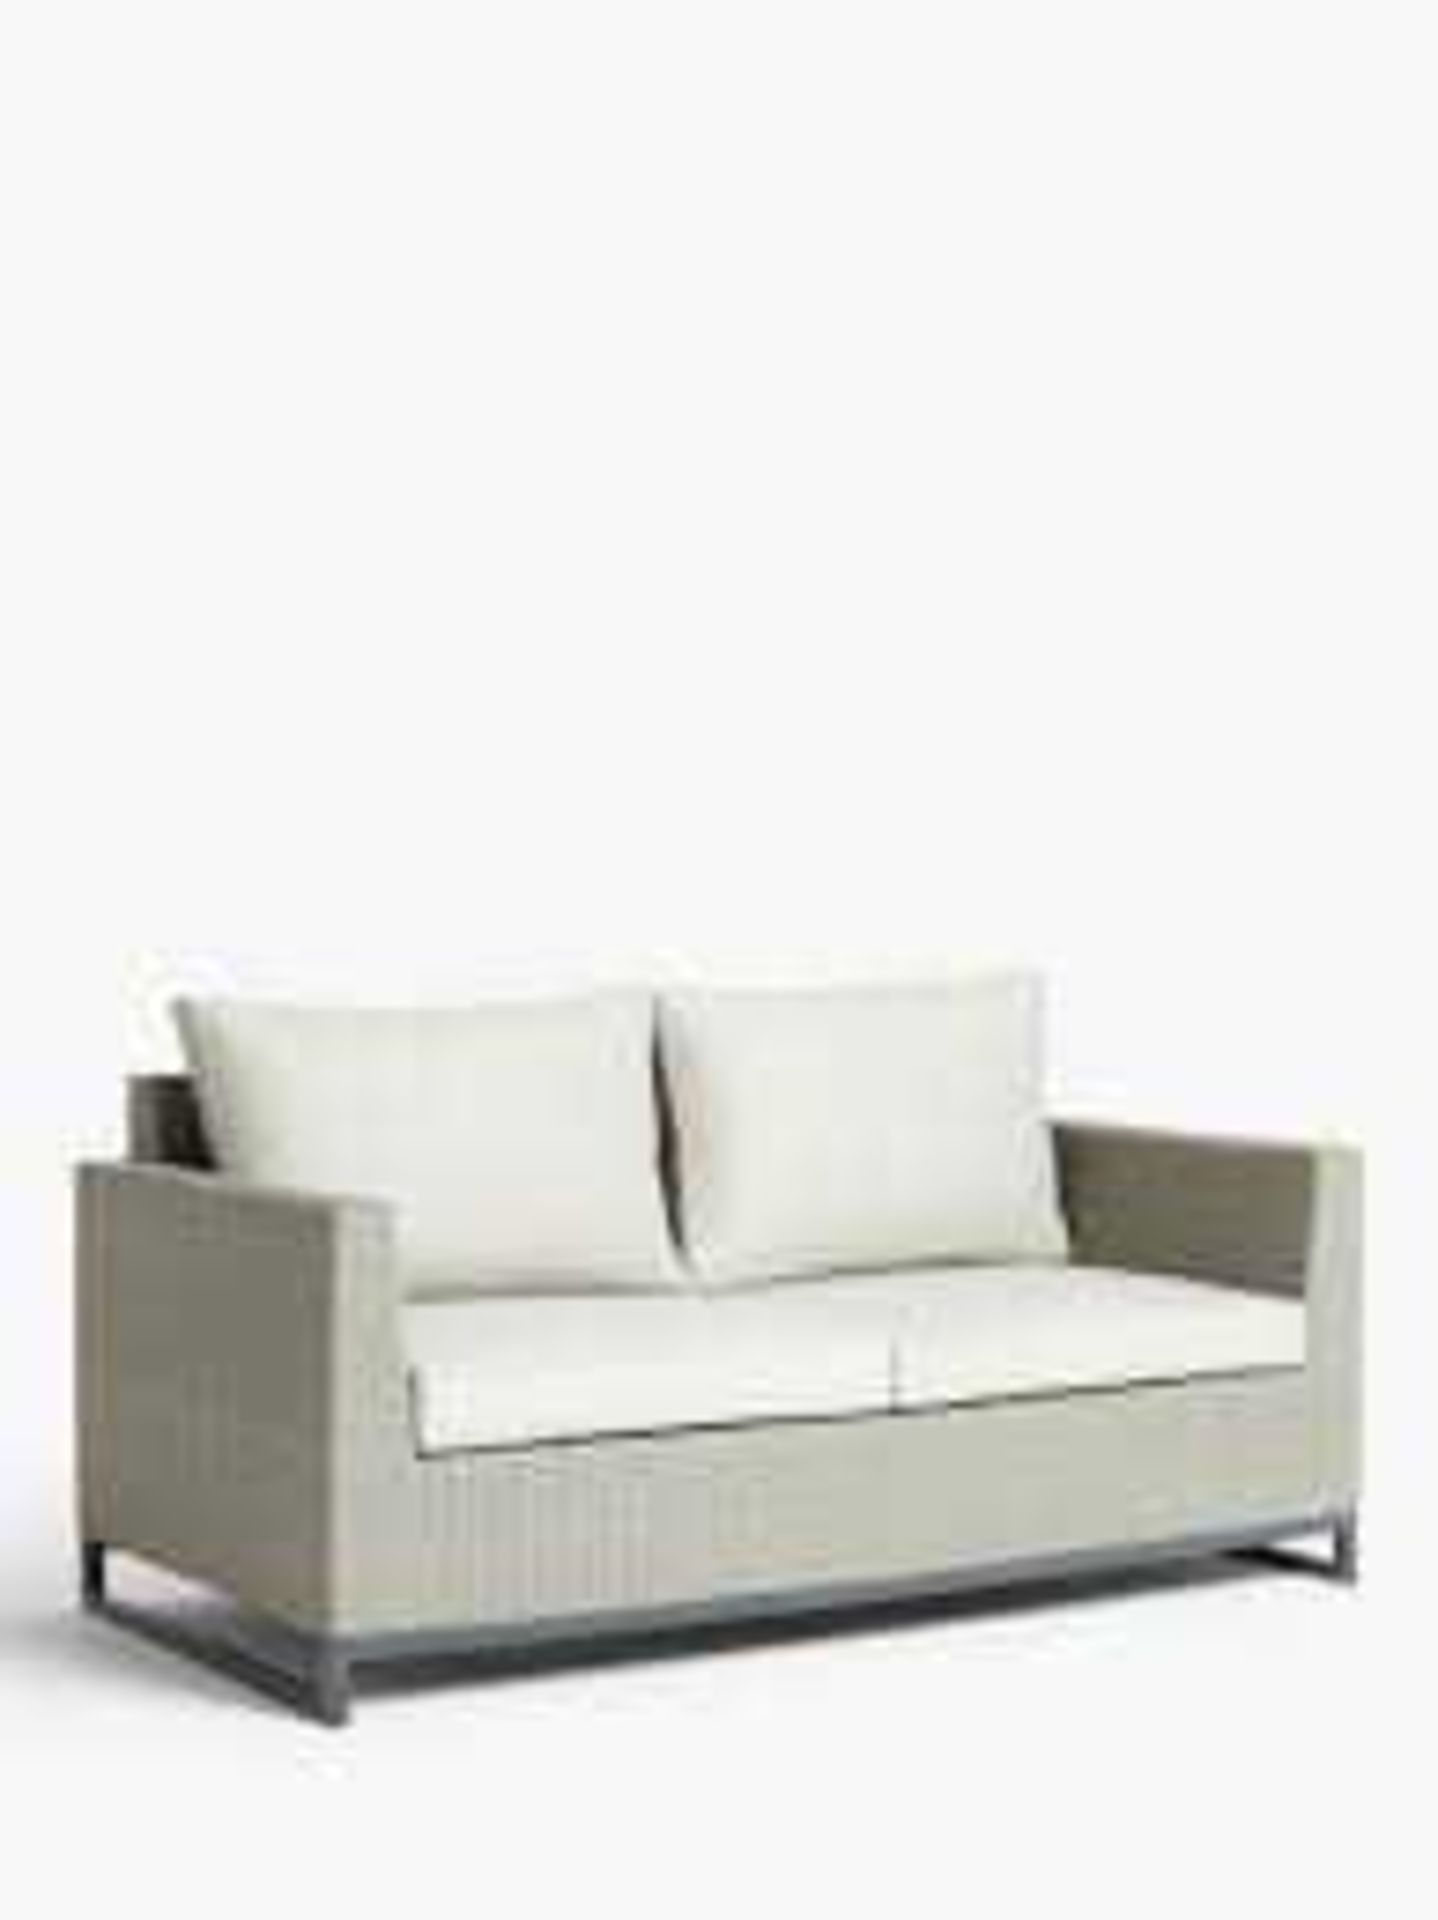 RRP £700 To Contain Unboxed 2Seater Rattan Garden Couch And 2 Rattan 1 Seater Chairs And Rattan Styl